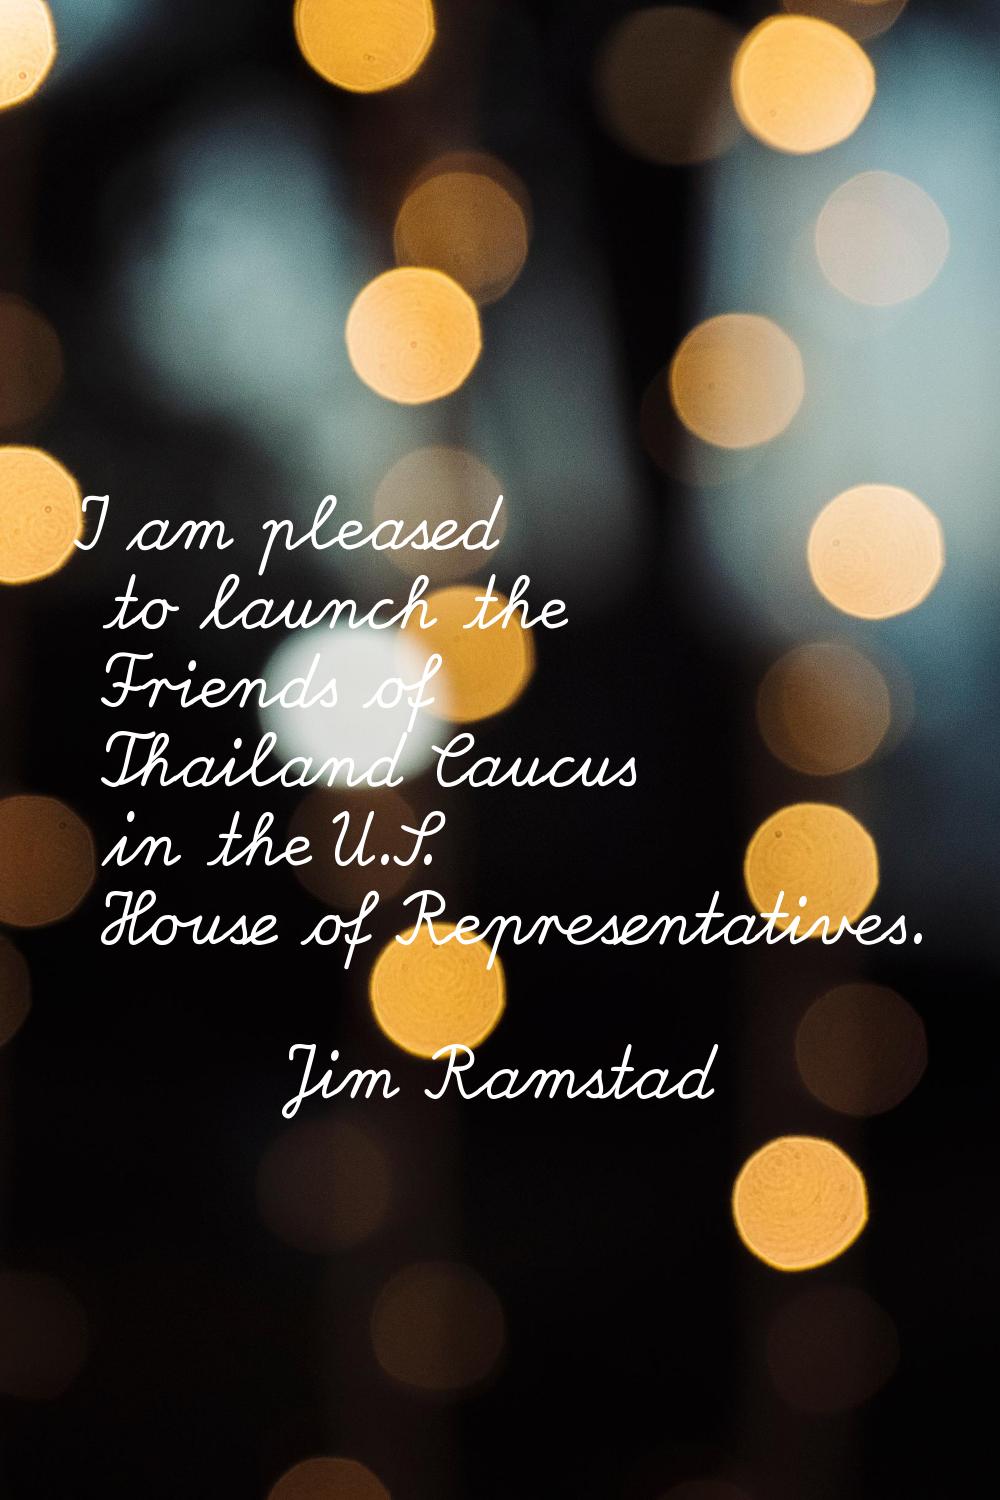 I am pleased to launch the Friends of Thailand Caucus in the U.S. House of Representatives.